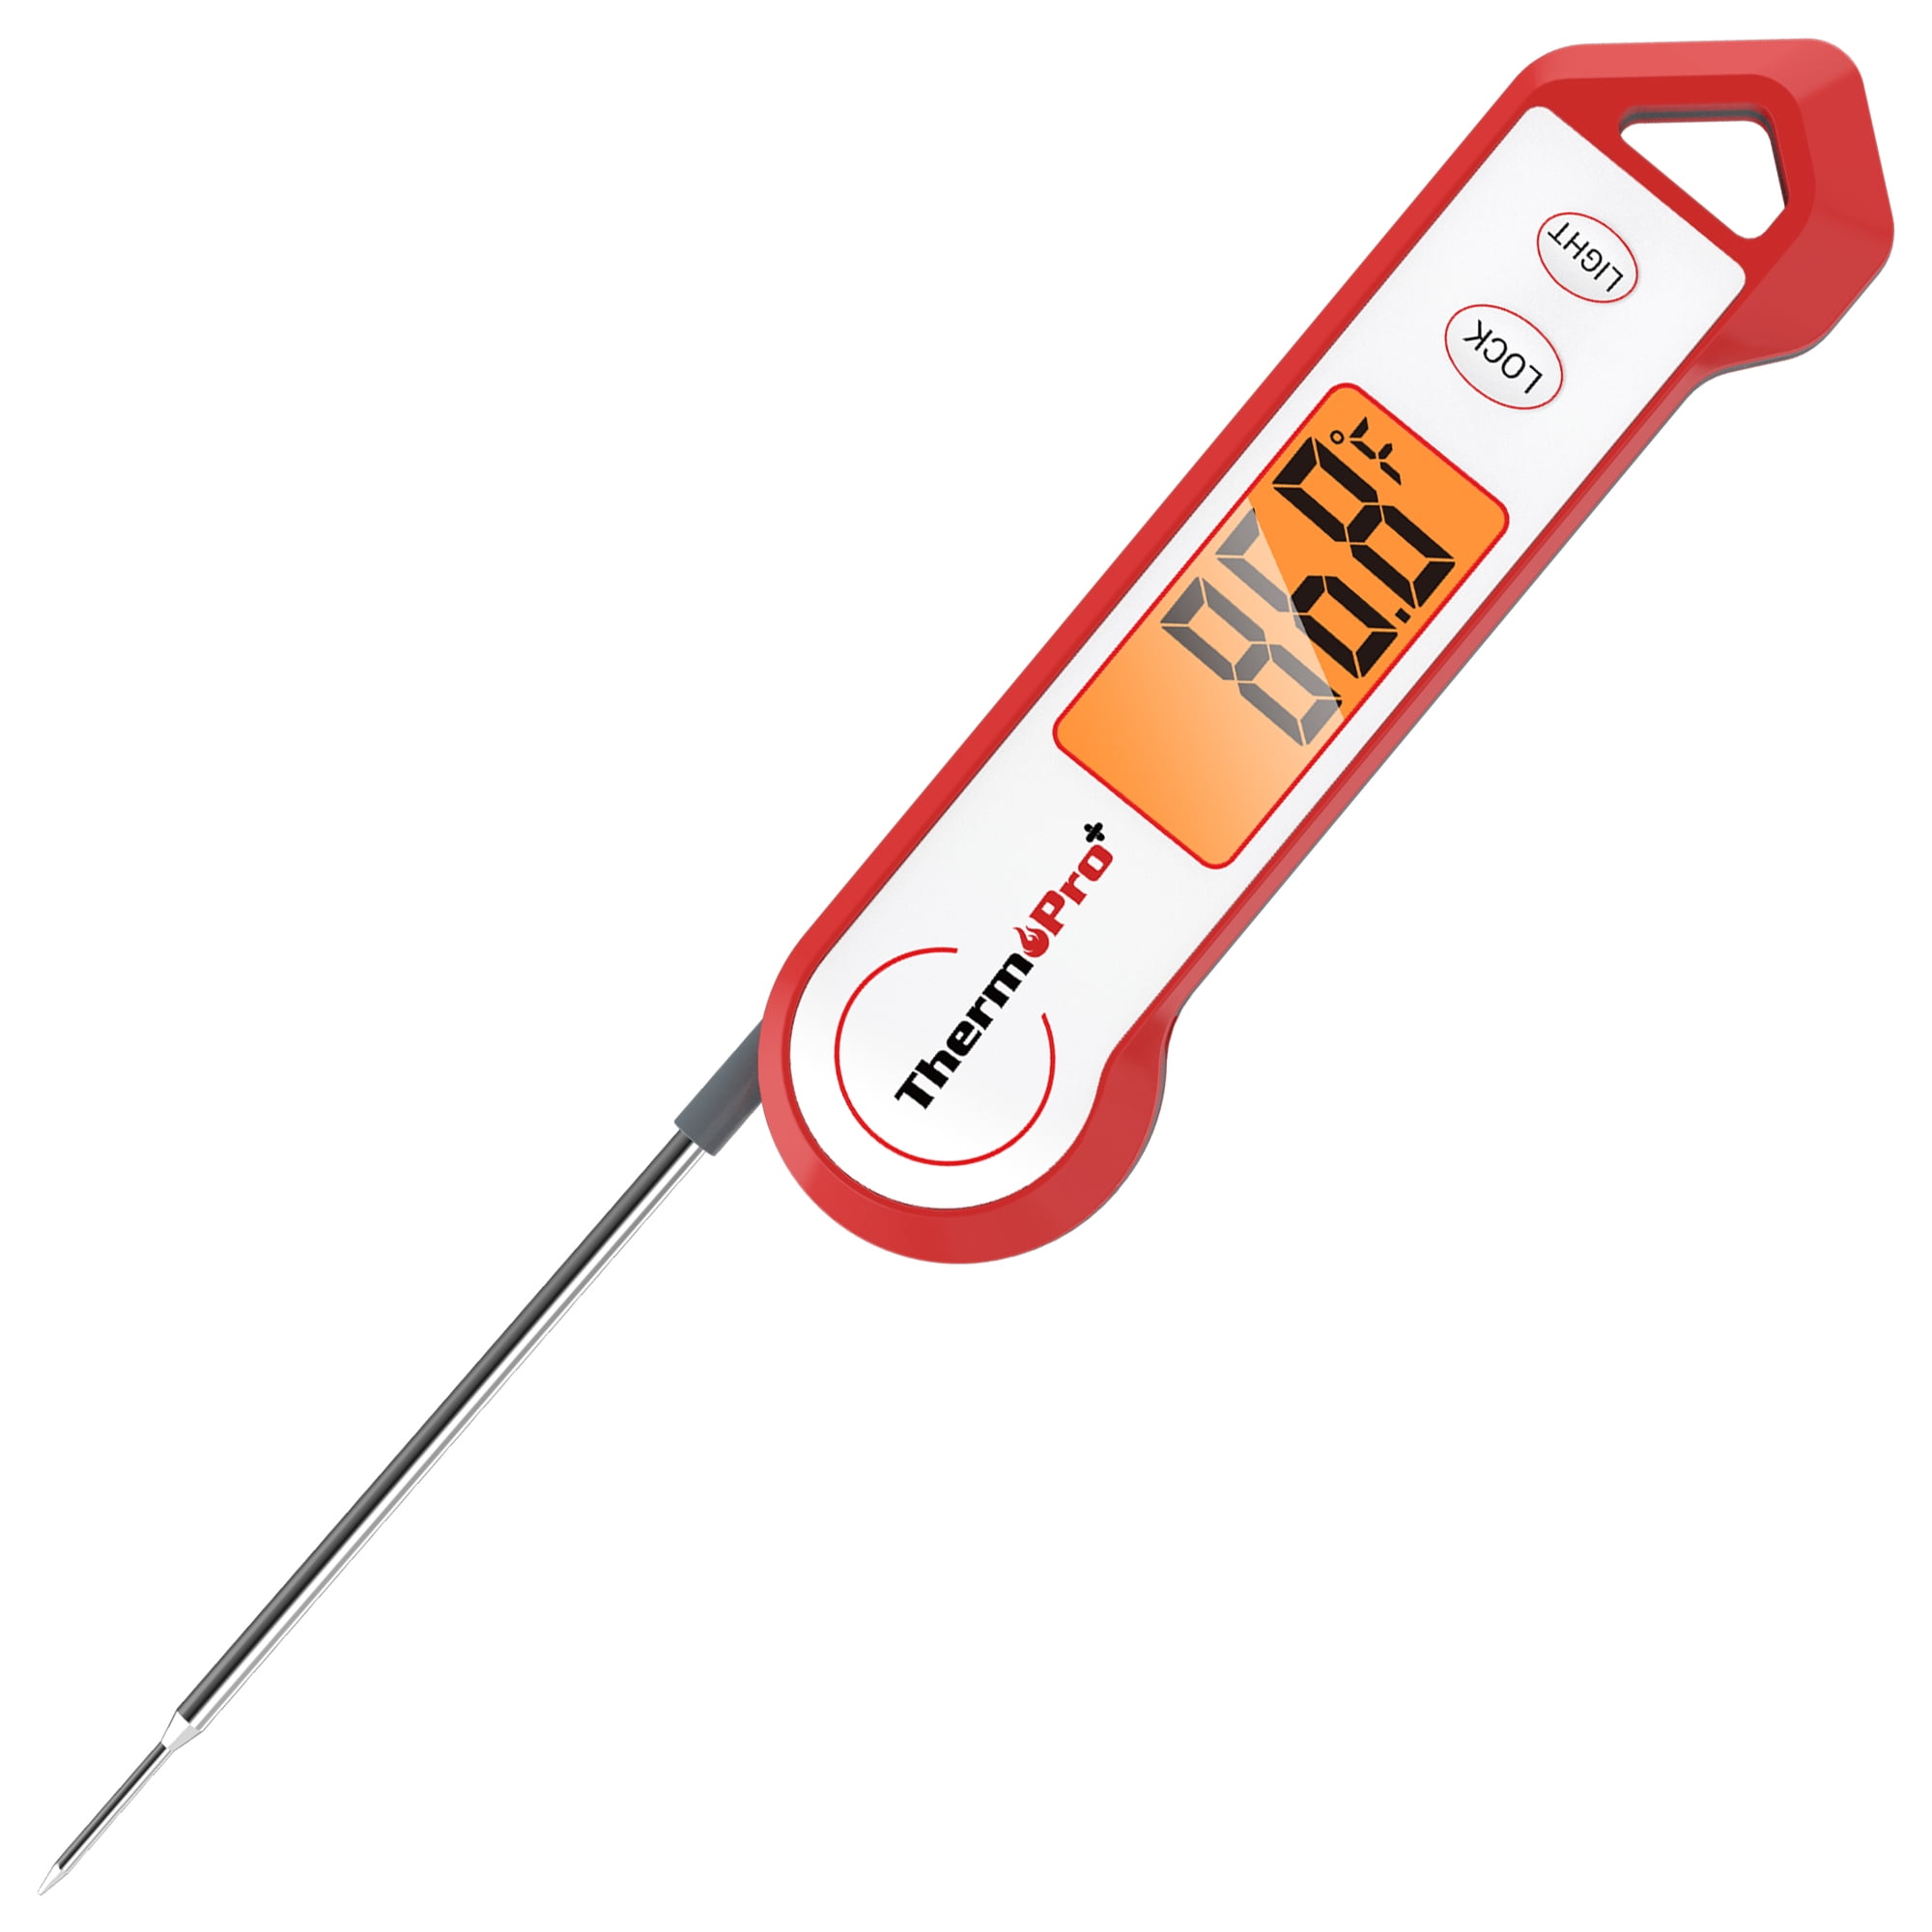 ThermoPro TP19H Digital Meat Thermometer for Cooking with Bright